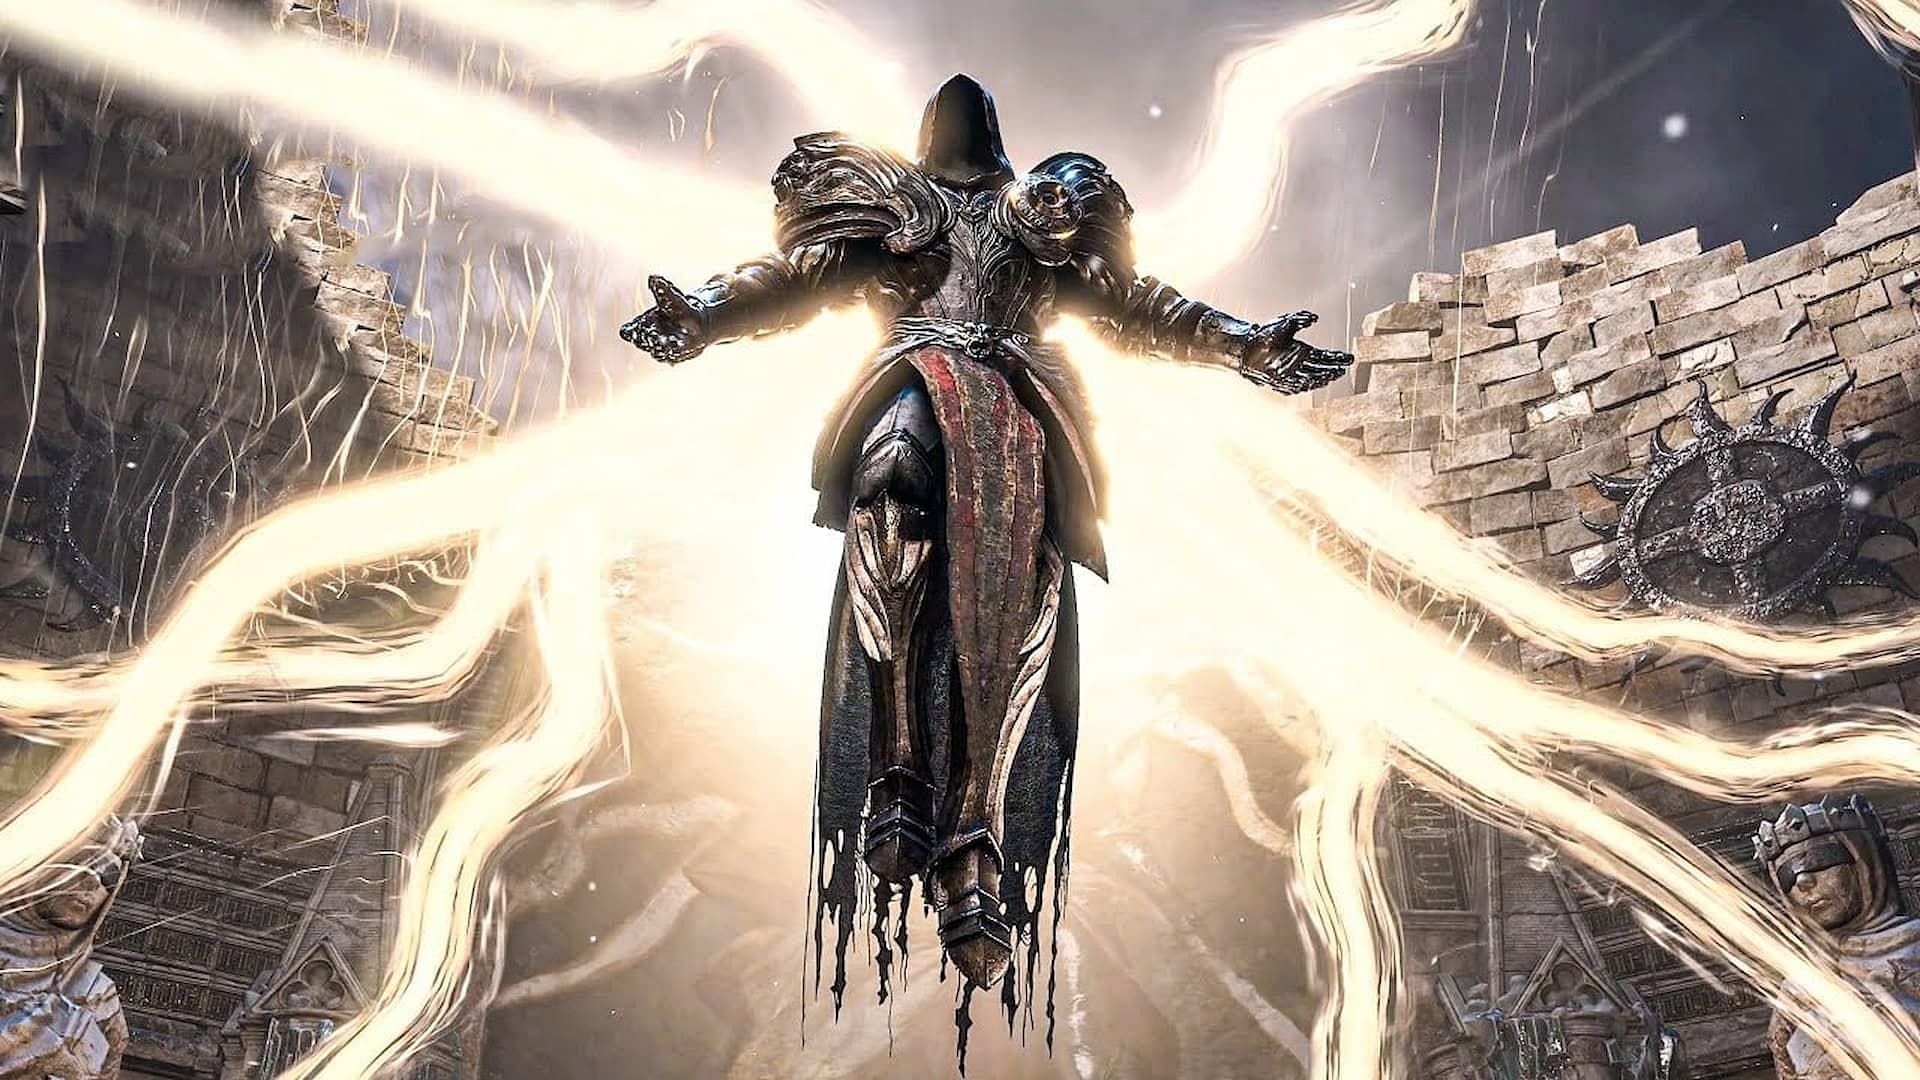 Inarius is one of the main characters in the world of Diablo 4.